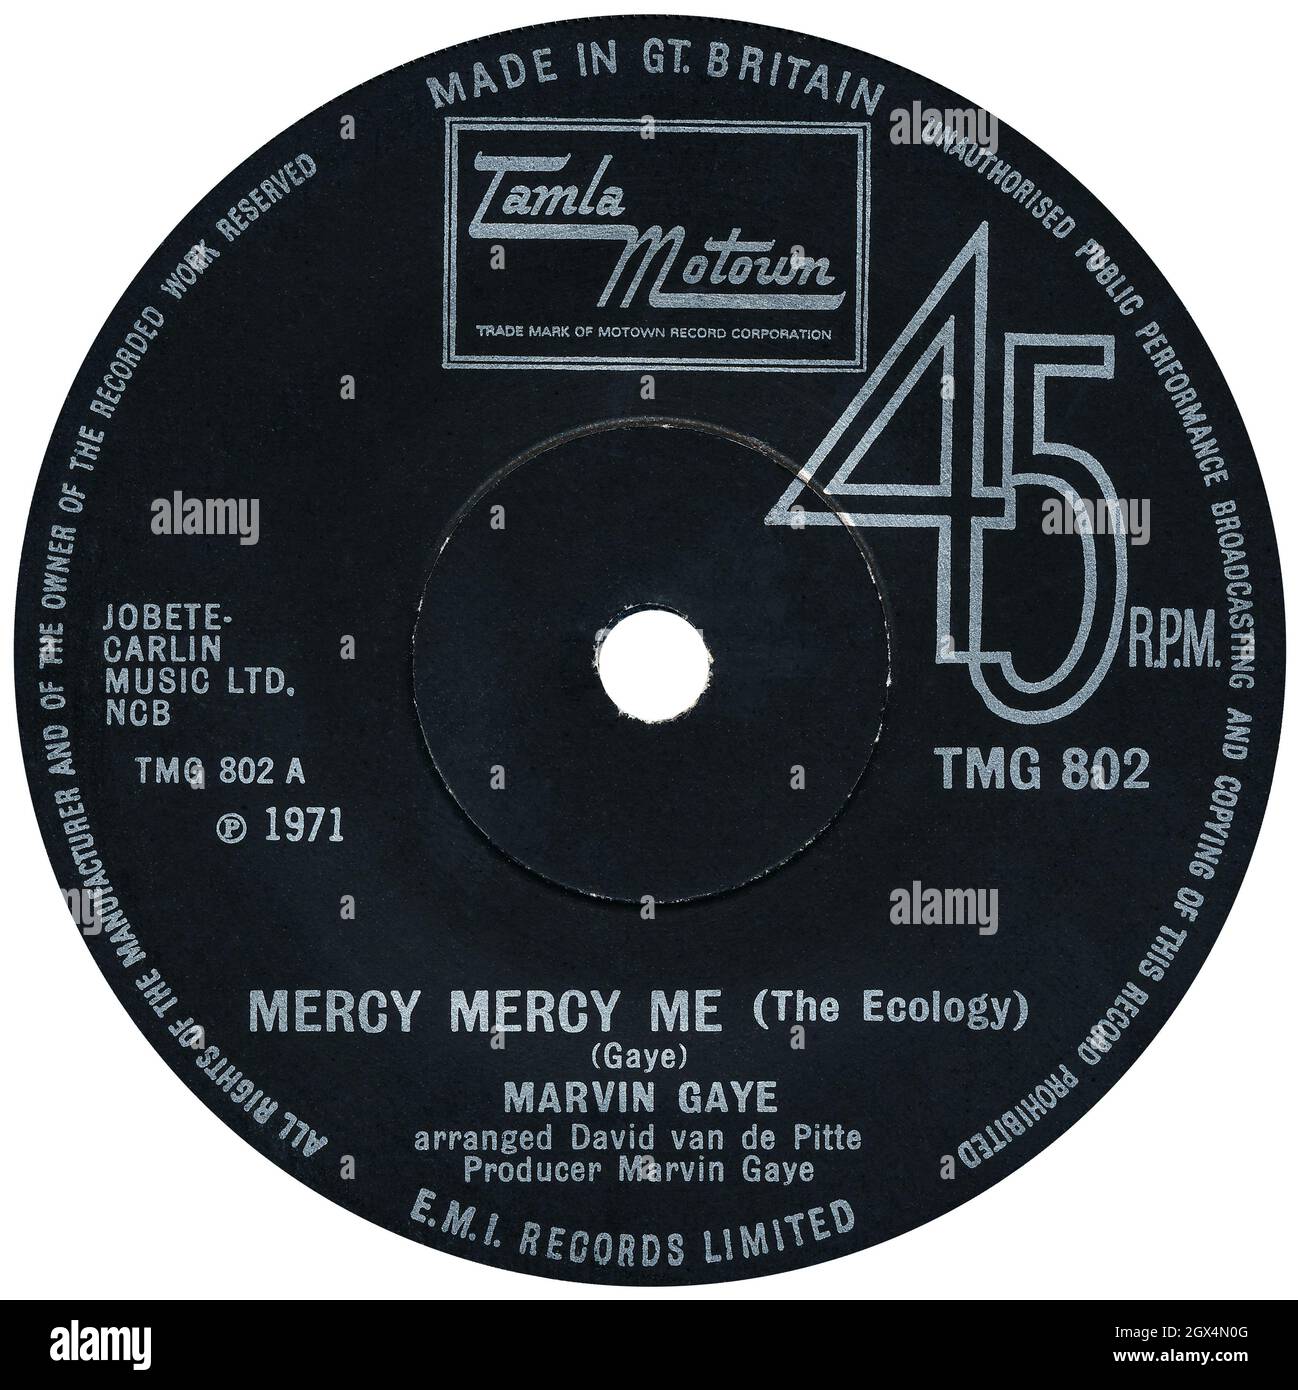 45 RPM 7' UK record label of Mercy Mercy Me (The Ecology) by Marvin Gaye. Written by Marvin Gaye, arranged by David Van Pitte and produced by Marvin Gaye. Released in February 1972 0n the Tamla Motown label. Stock Photo